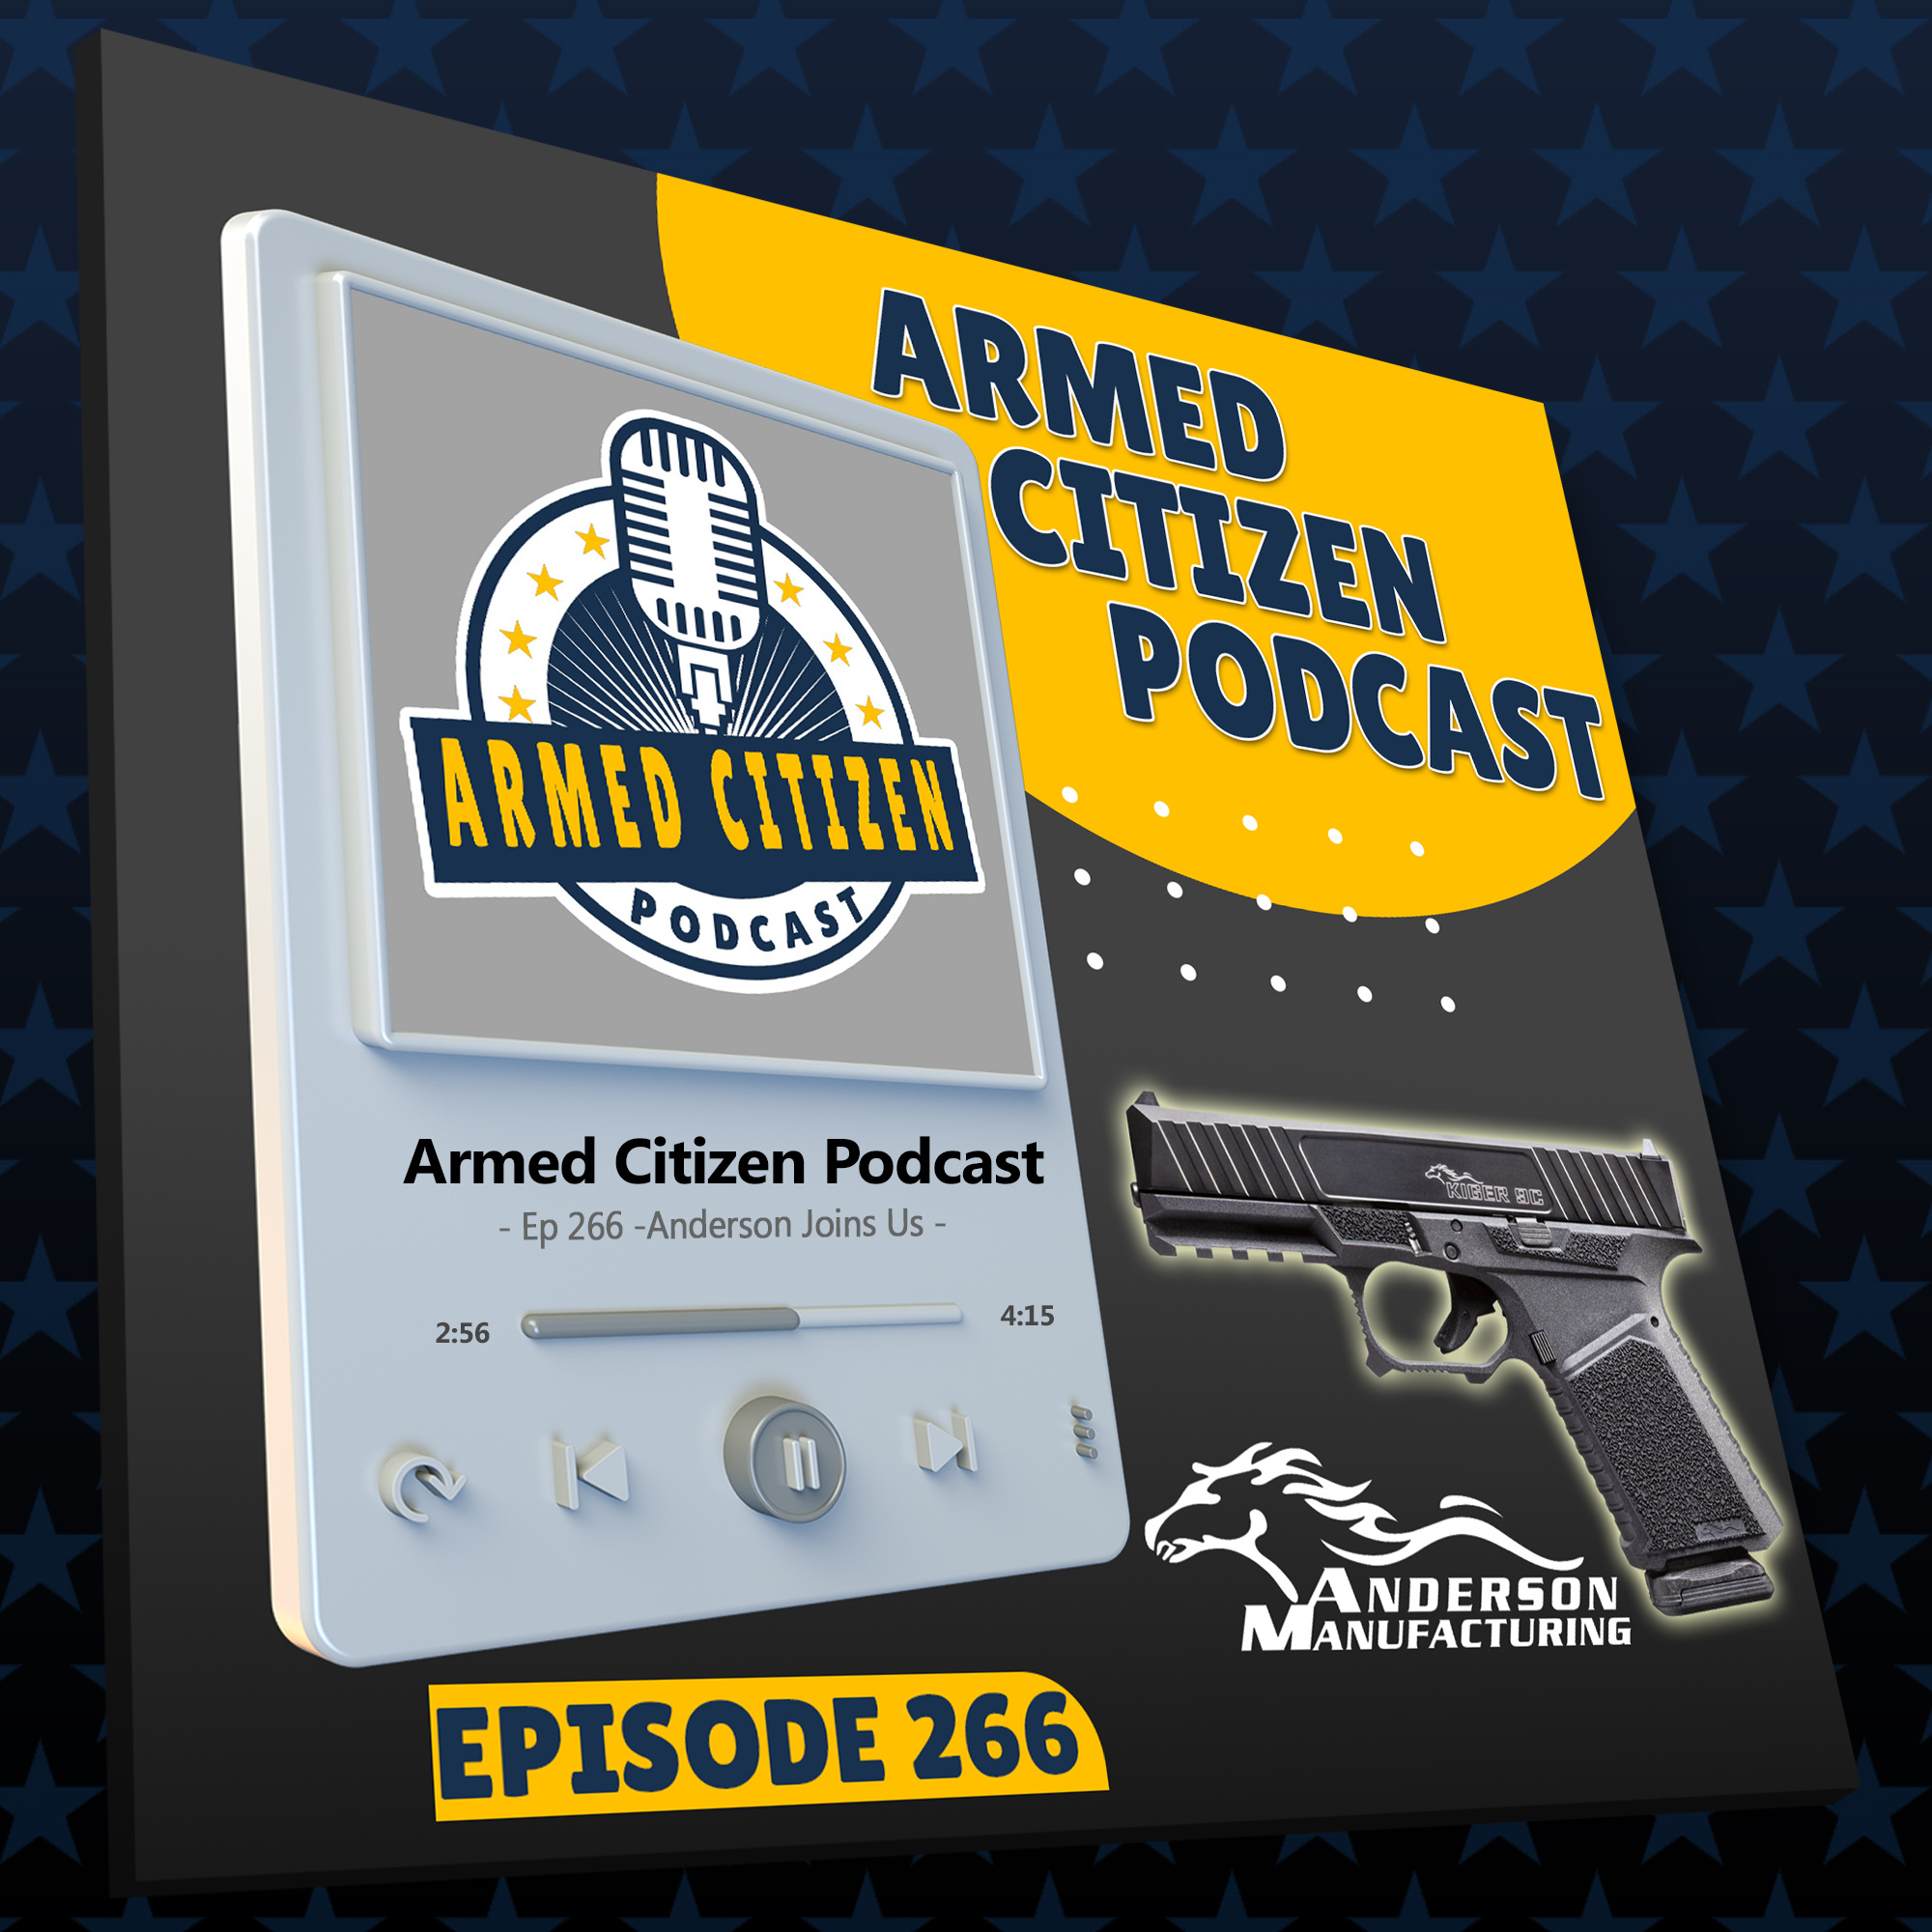 Anderson Manufacturing Joins Us | The Armed Citizen Podcast LIVE #266